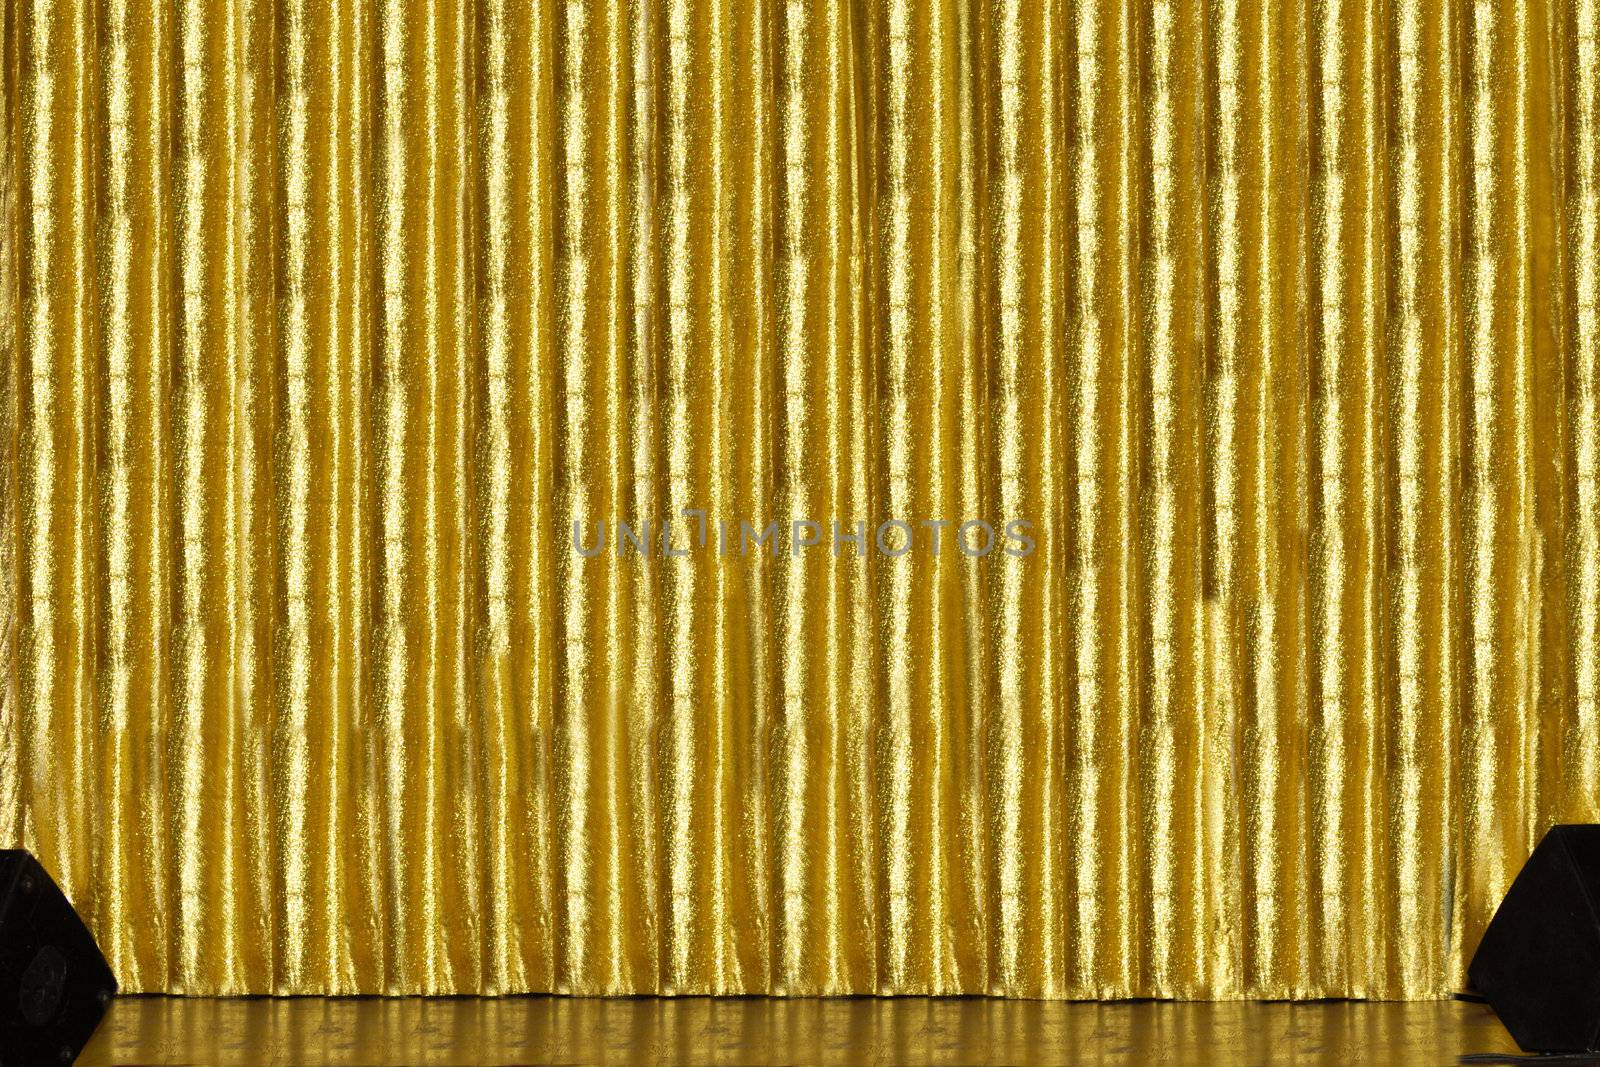 A stage with golden curtain and spakers